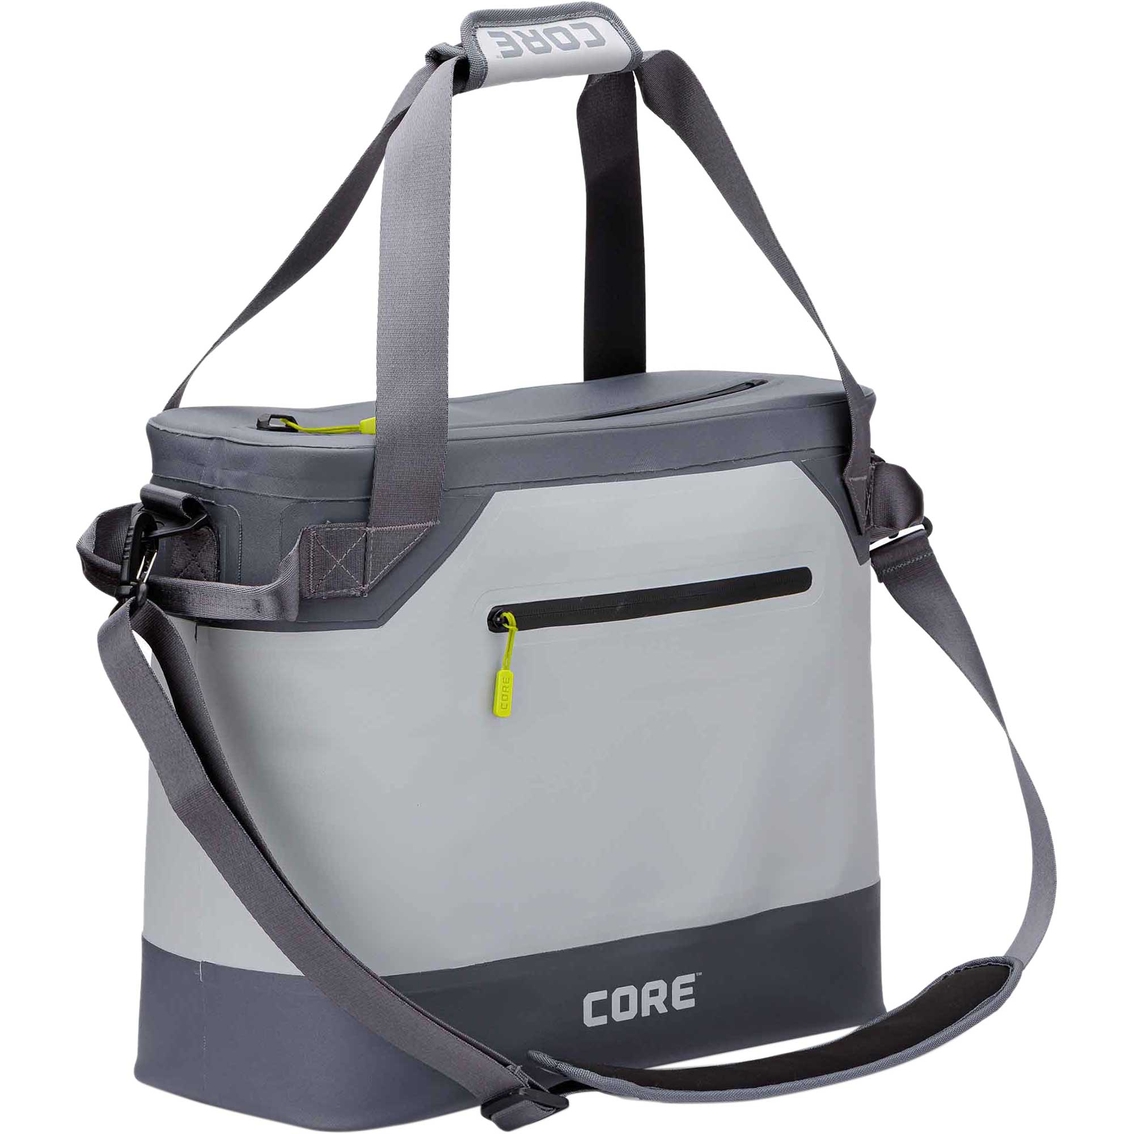 Core Equipment 20L Performance Soft Cooler Tote - Image 4 of 10